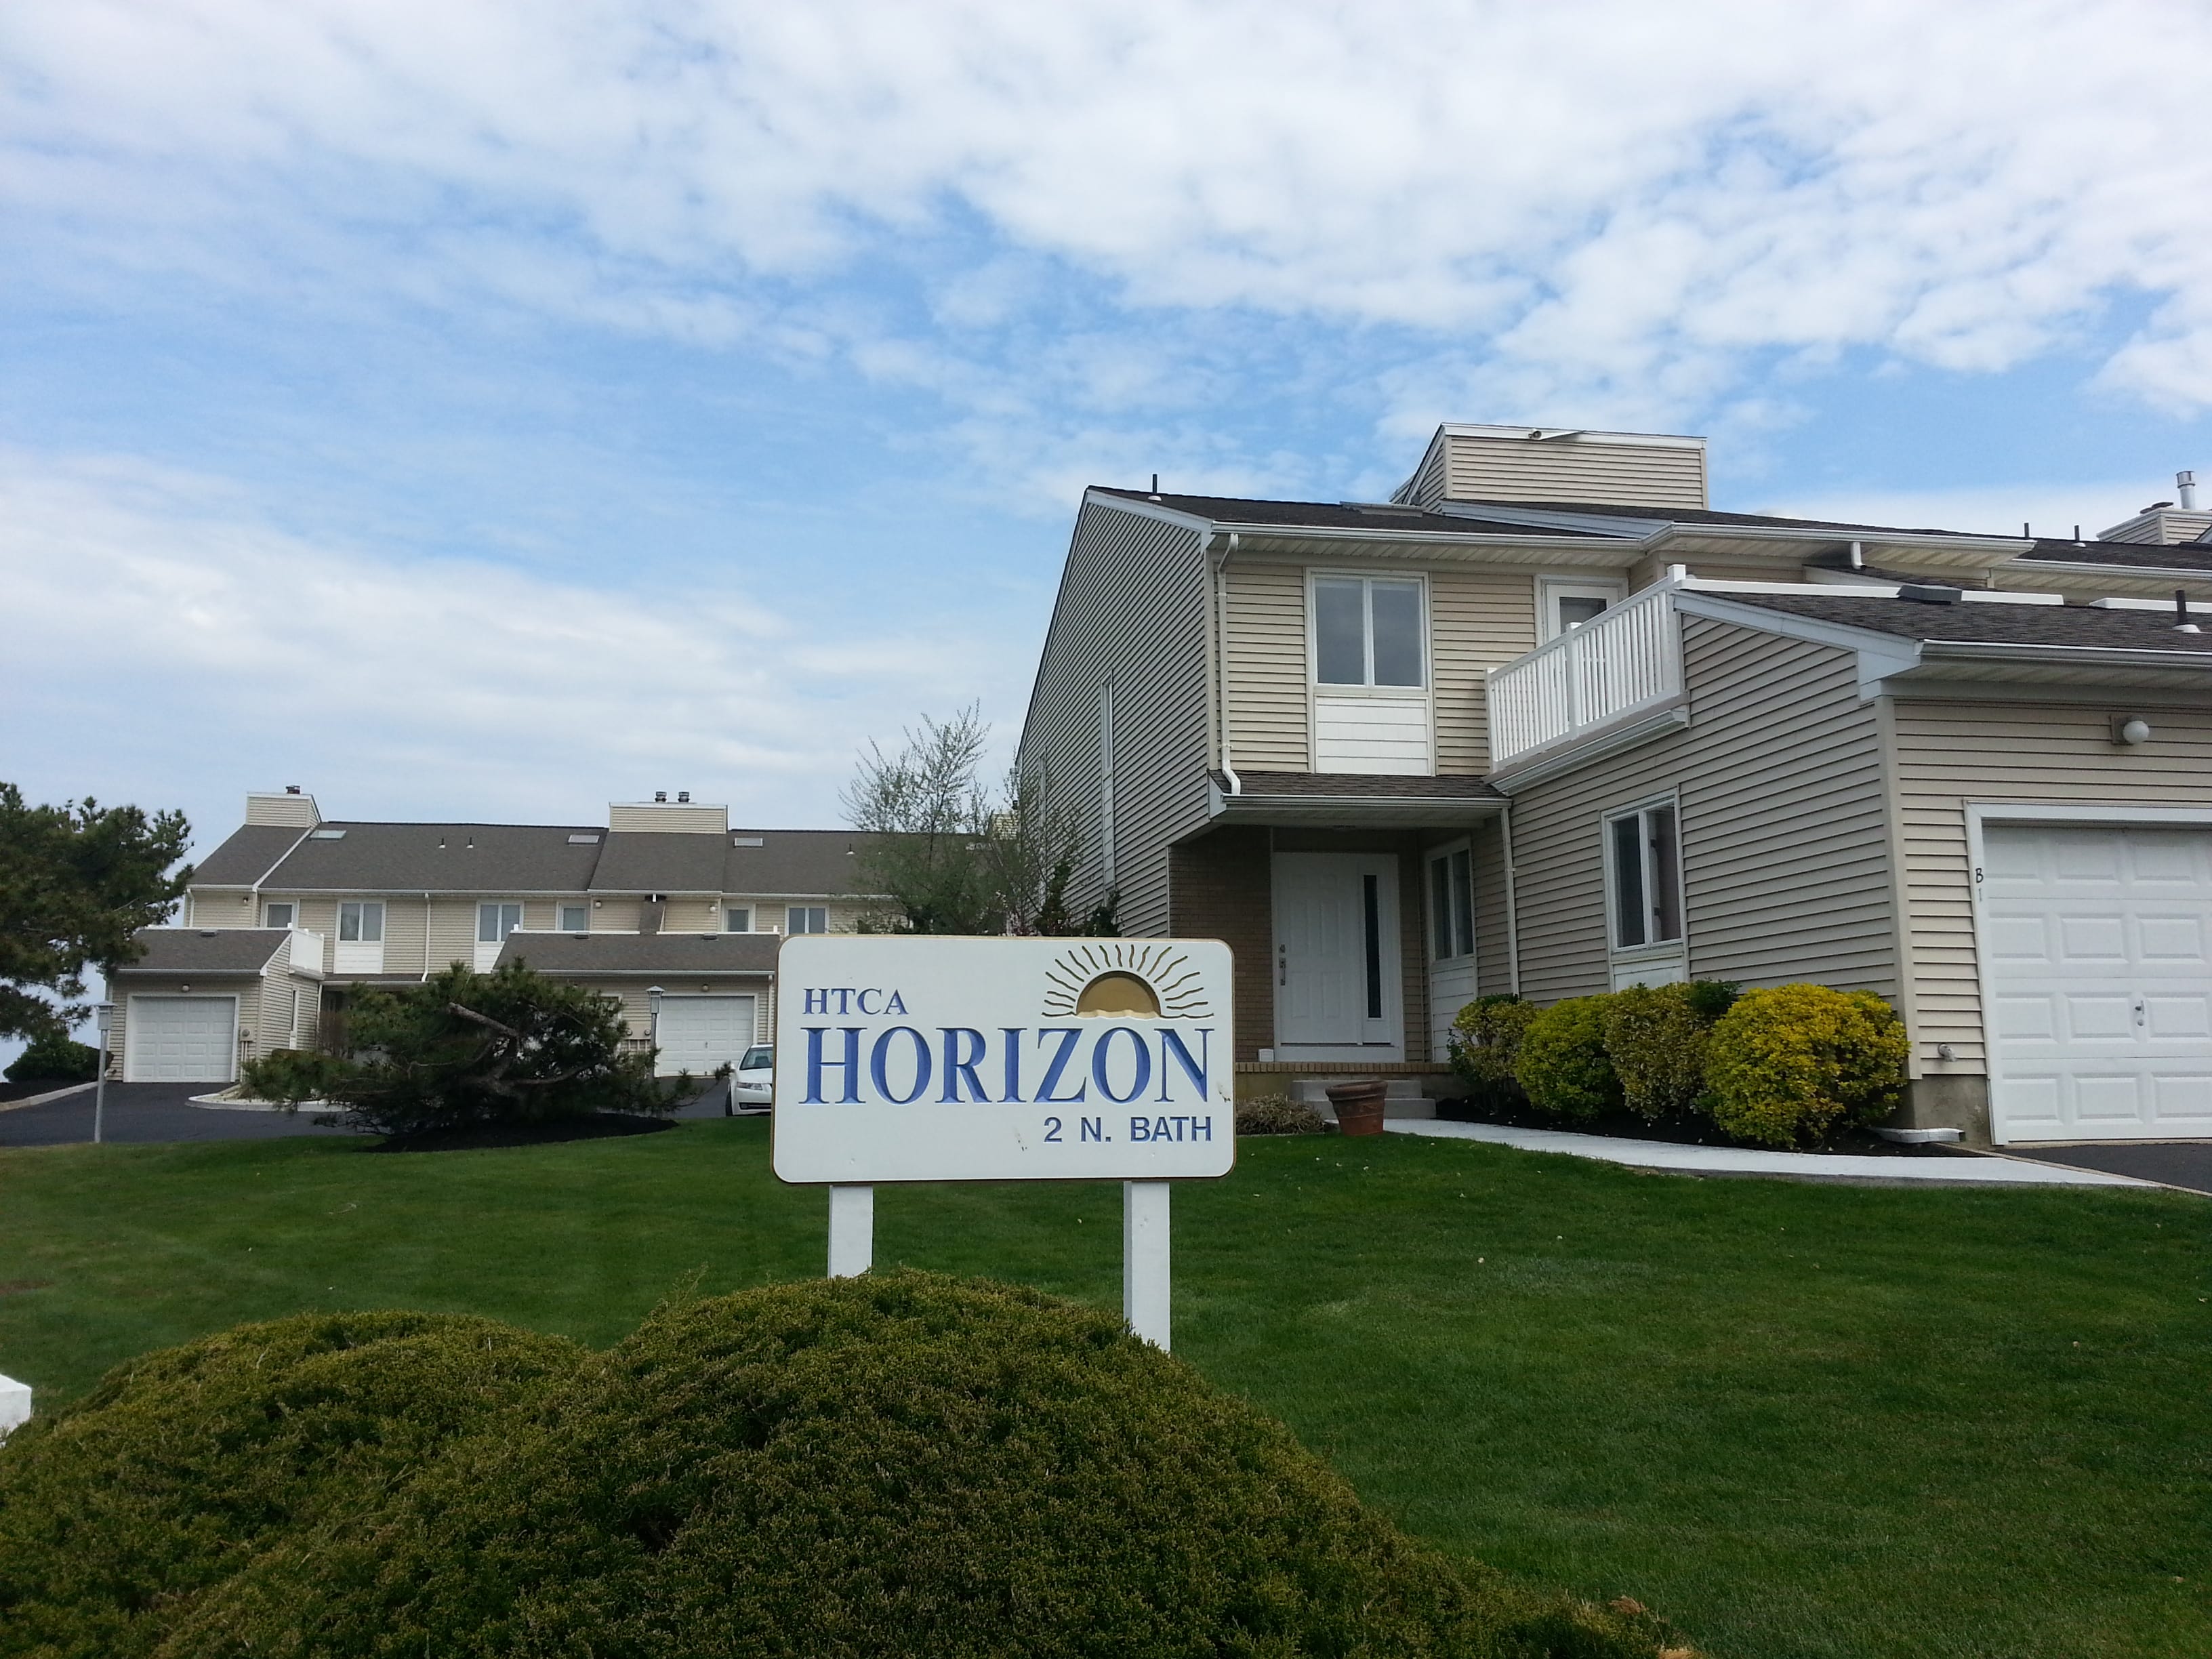 Horizon House is located at the intersection of N. Bath Ave and Ocean Blvd right on the boardwalk